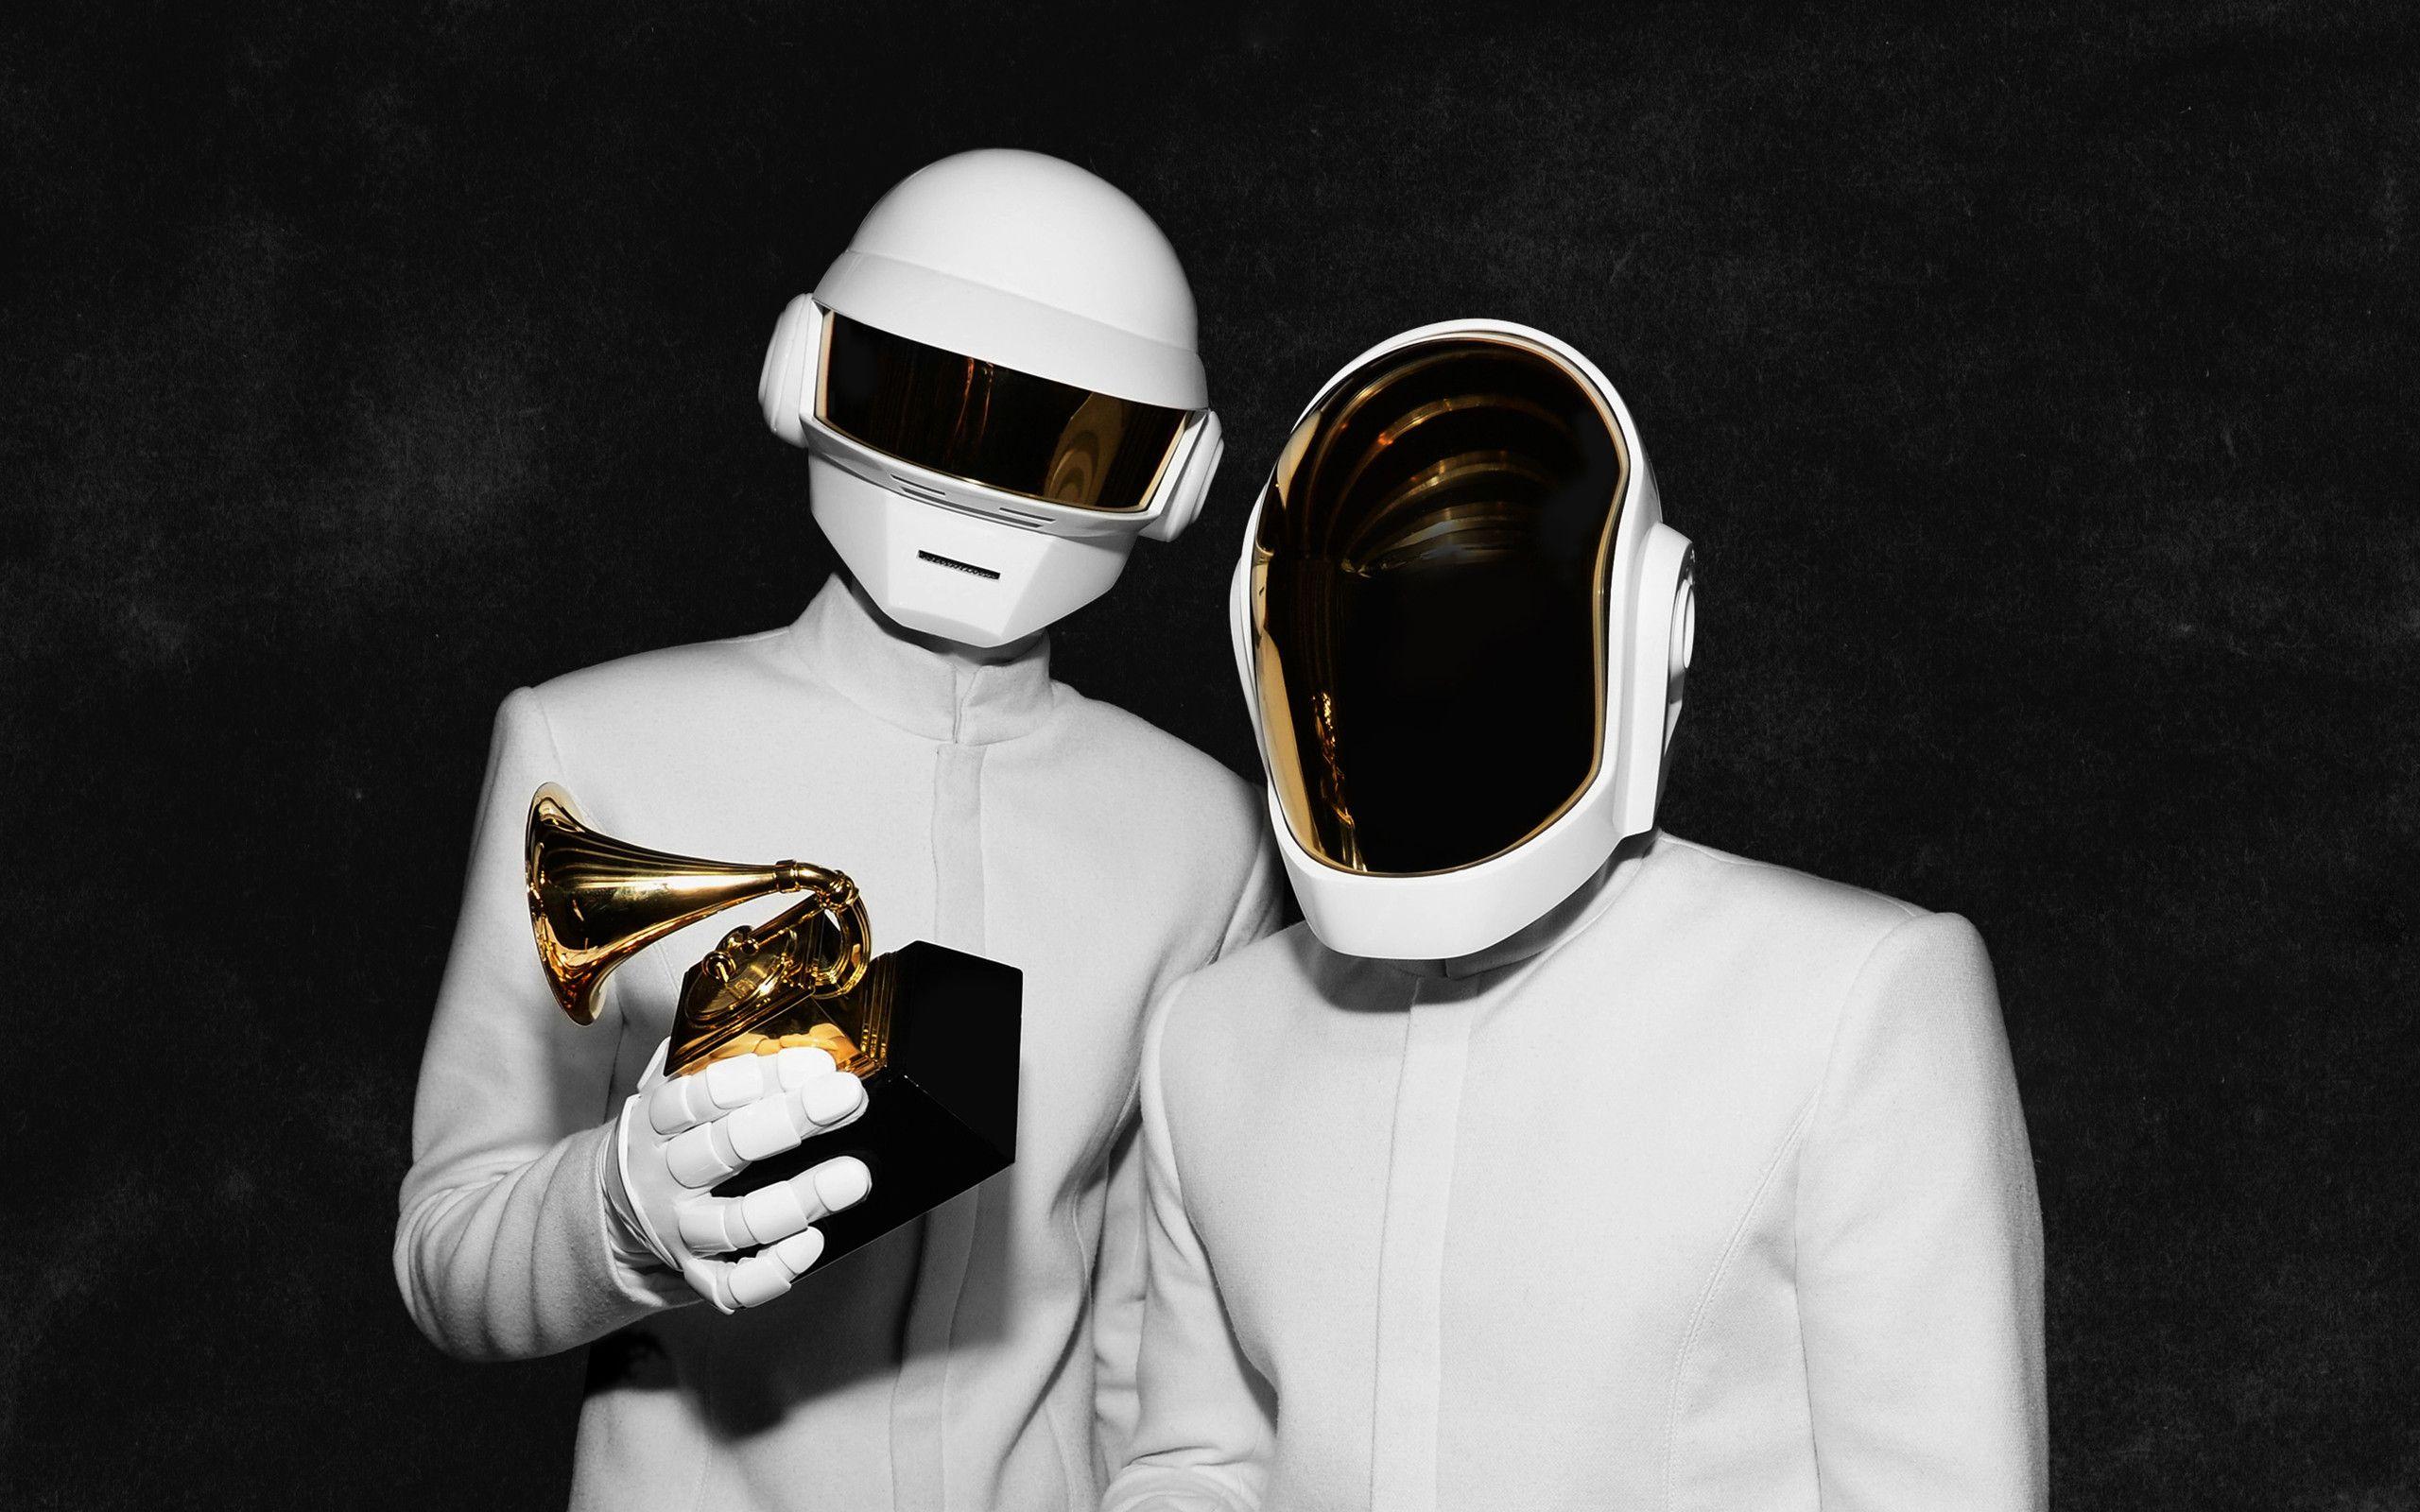 Daft Punk At The Grammys (Poster Wallpaper IPhone5)